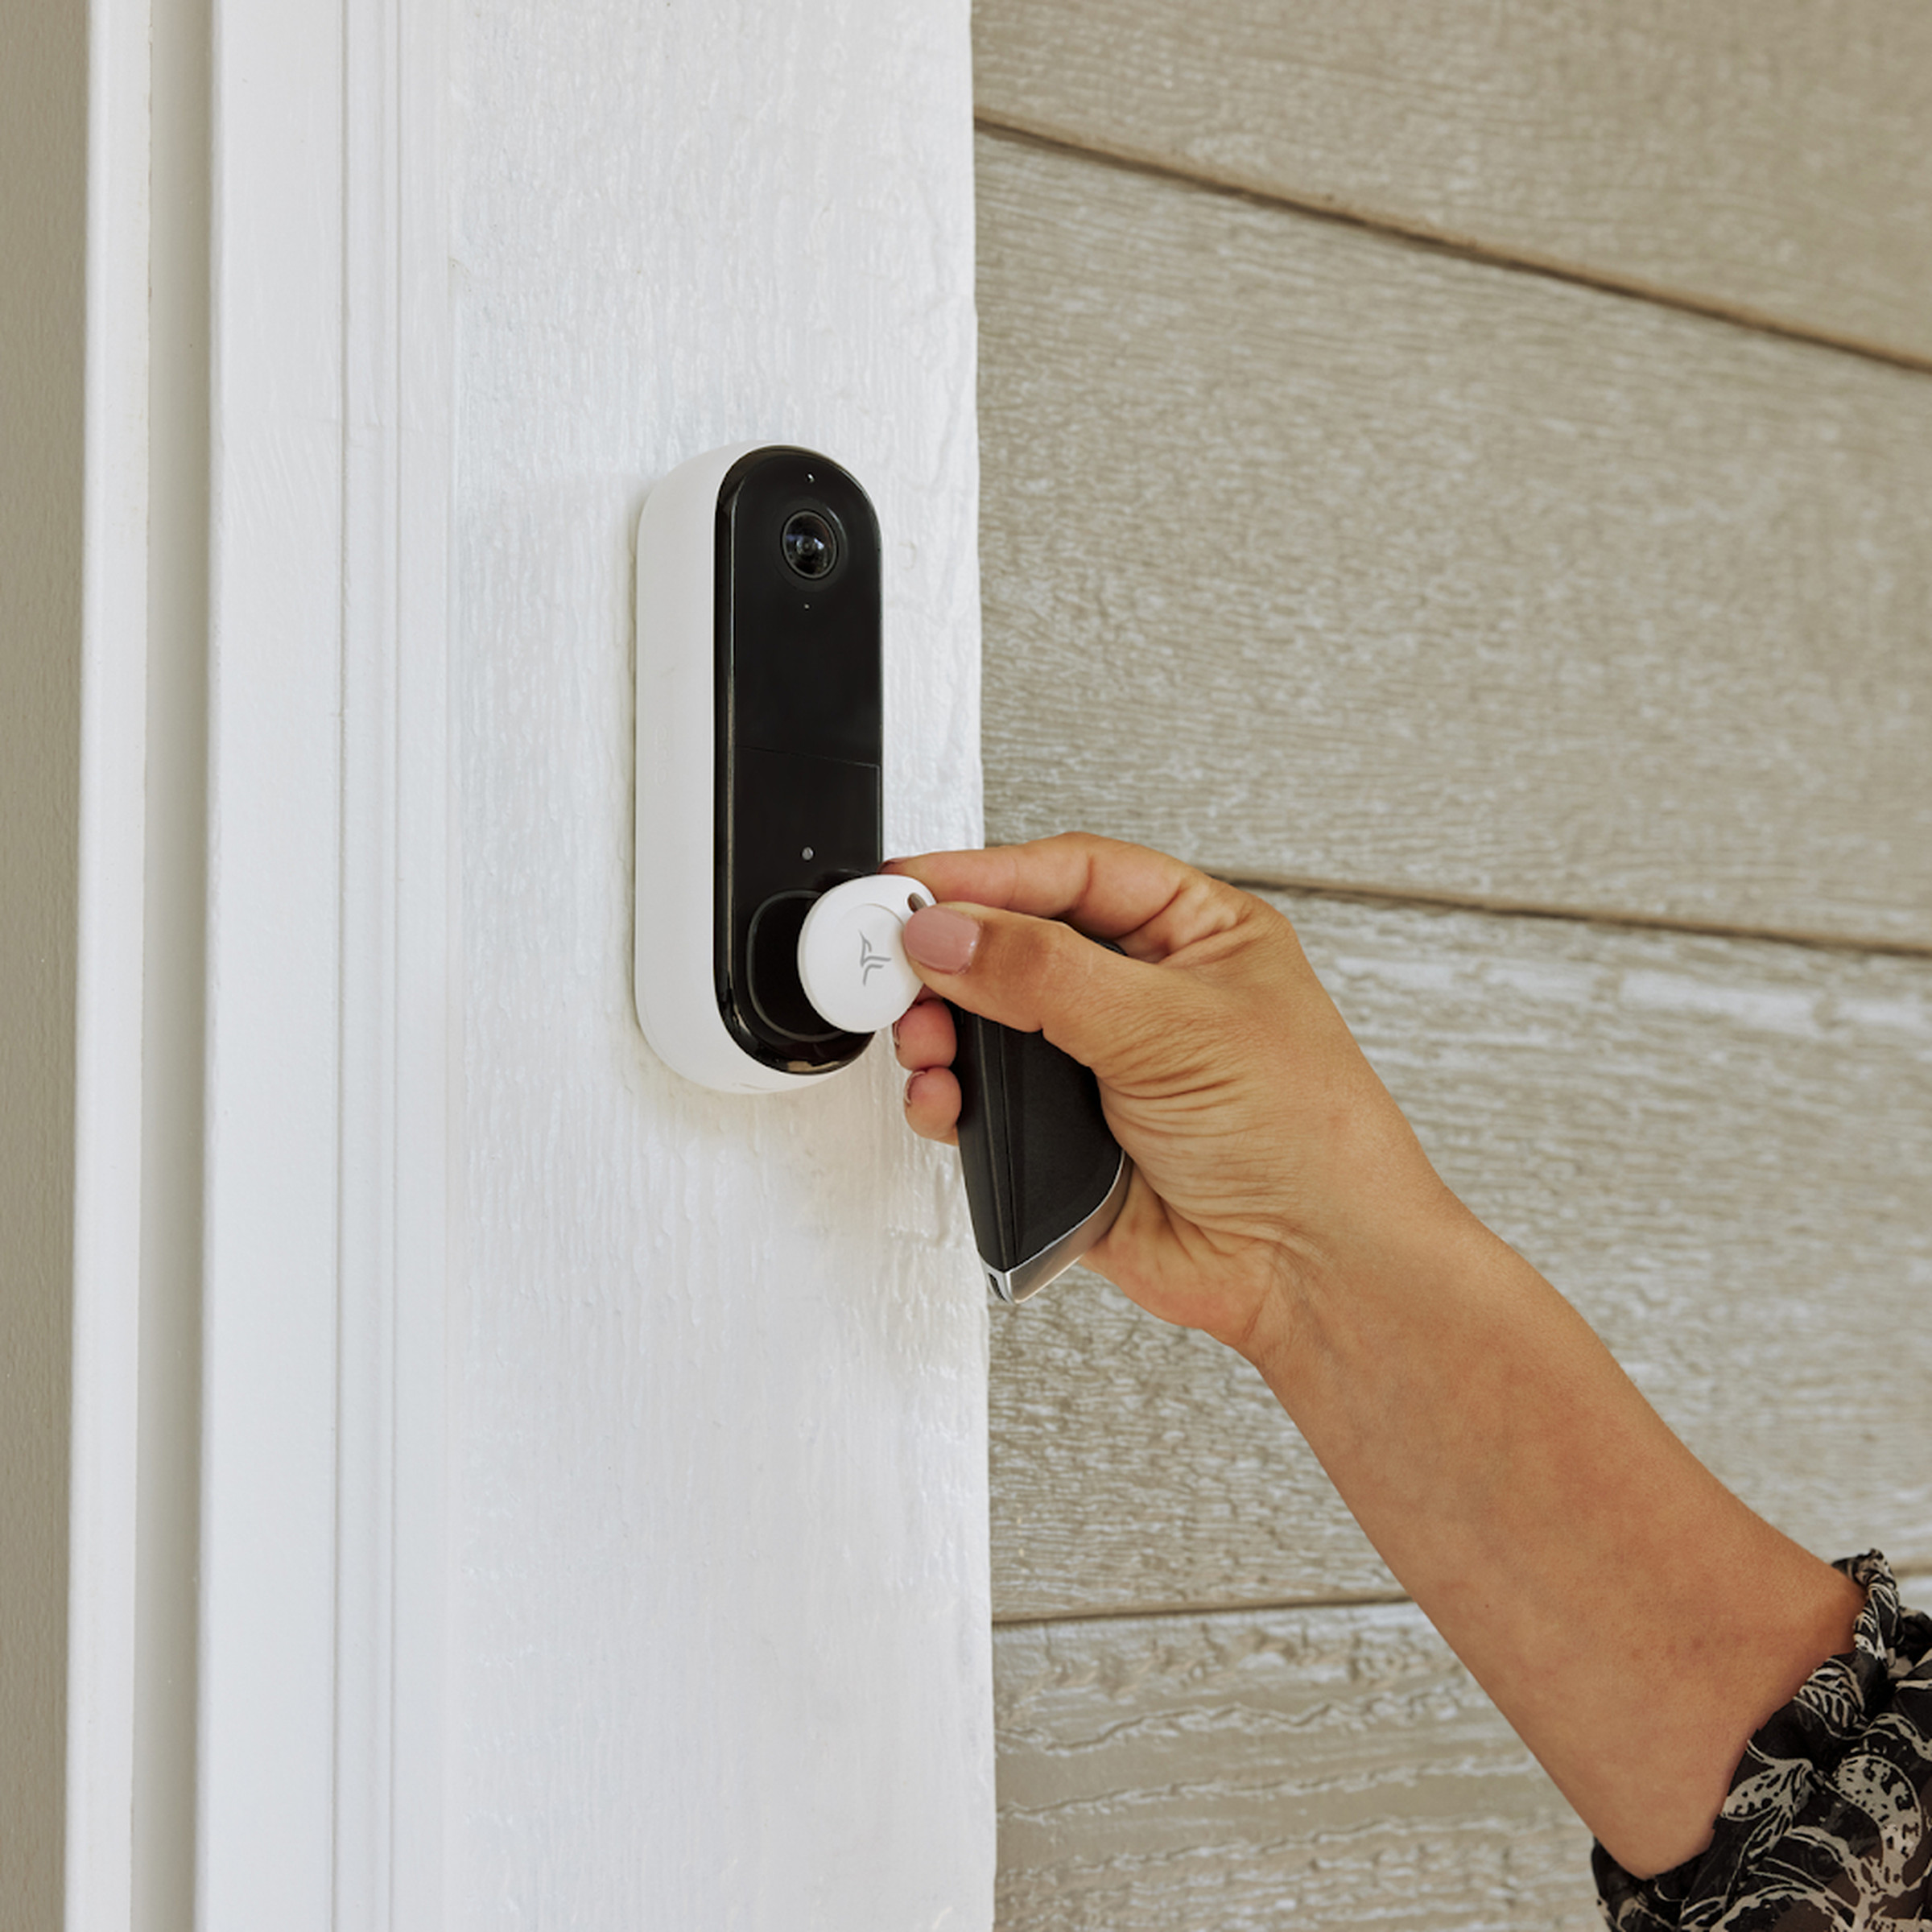 A person holding an Arlo security tag up to a doorbell.